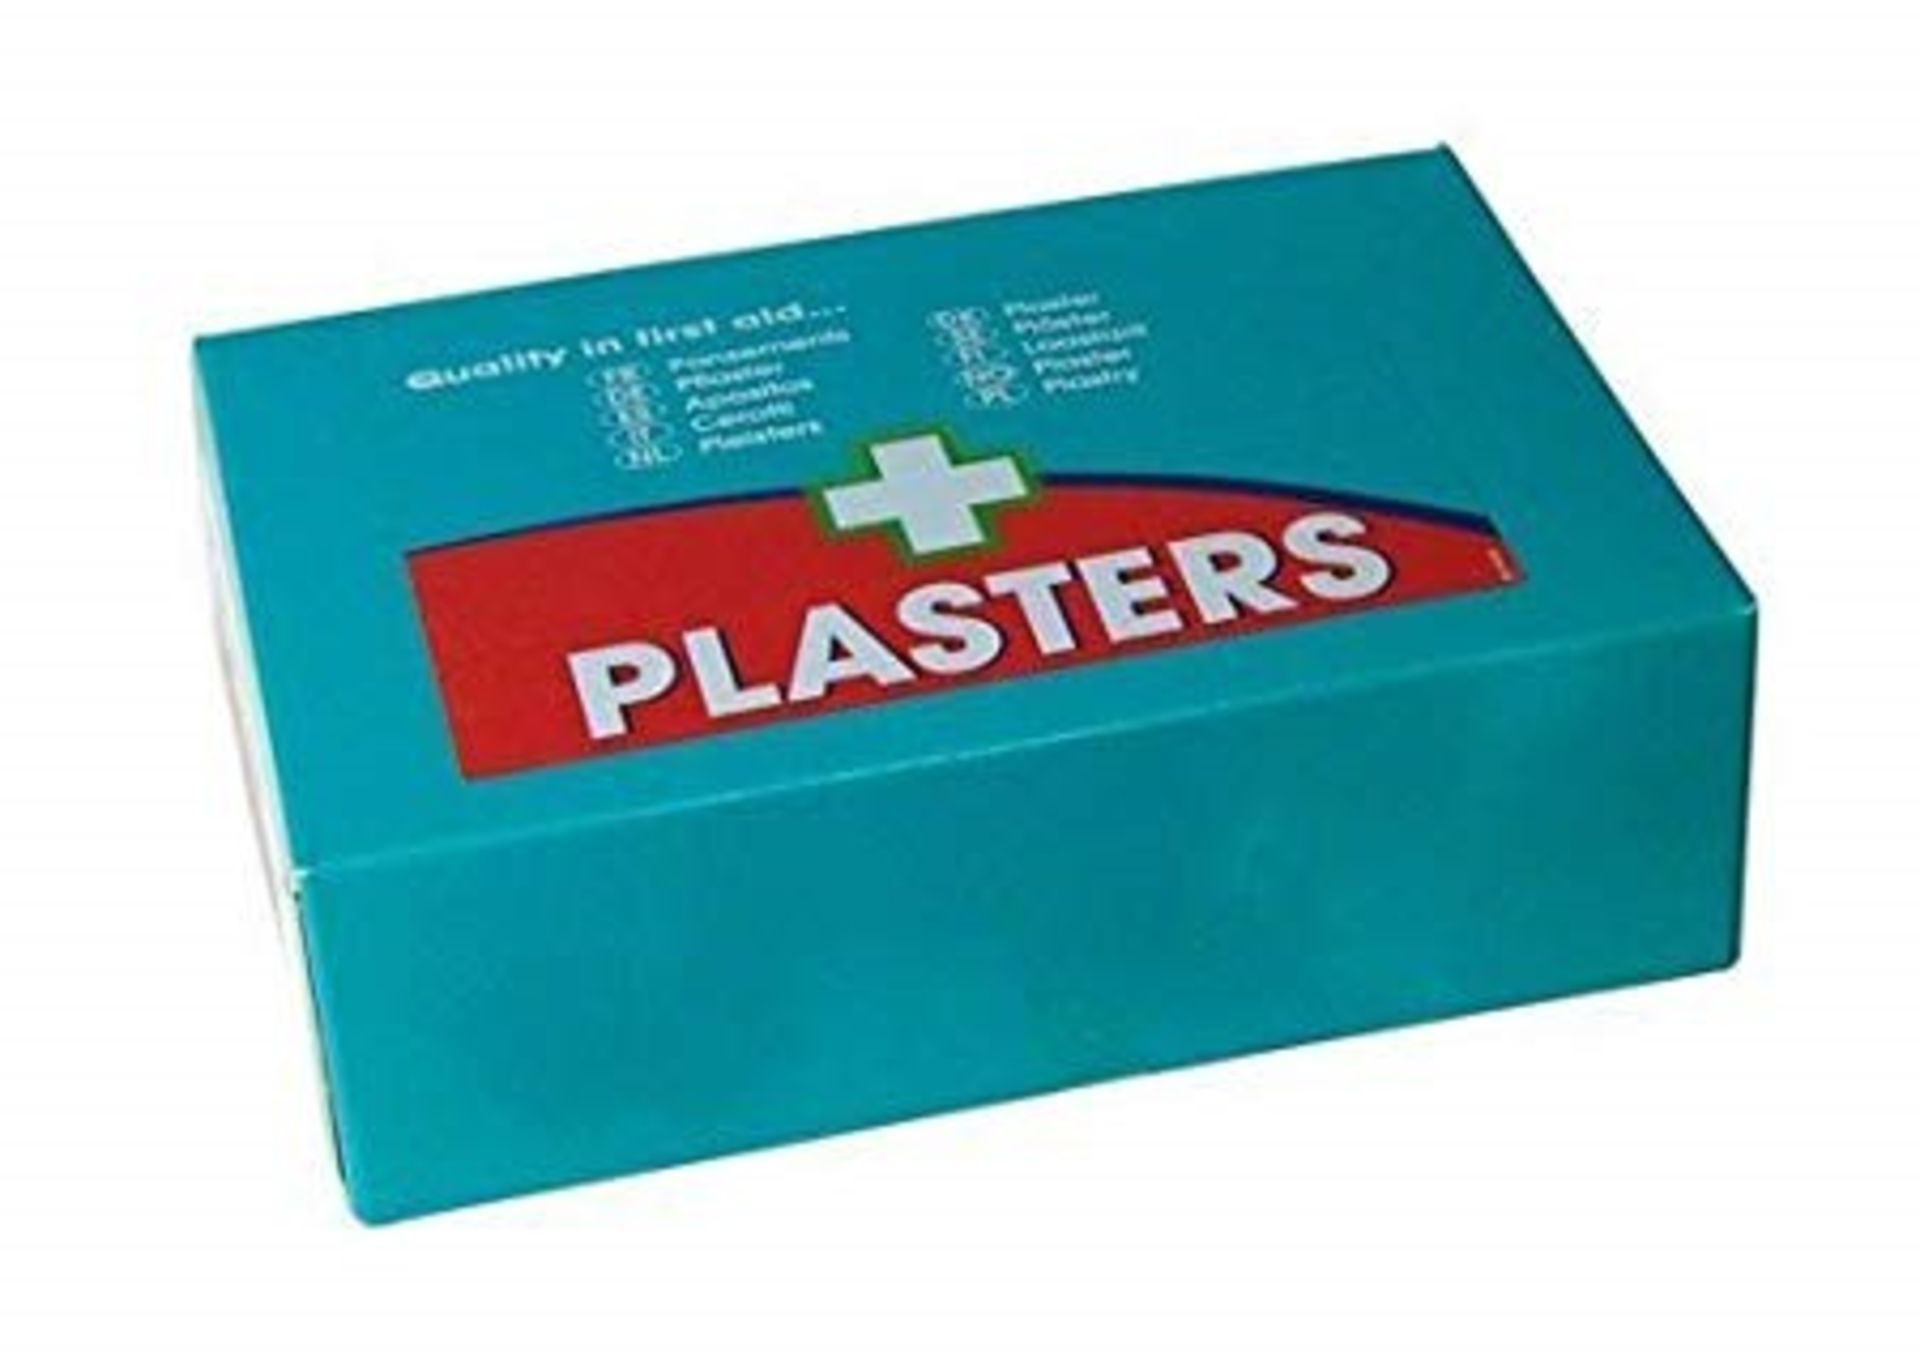 1 LOT TO CONTAIN 53 ASTROPLAST FABRIC PLASTERS REFILL / PN - 350 / RRP £515.16 (VIEWING HIGHLY